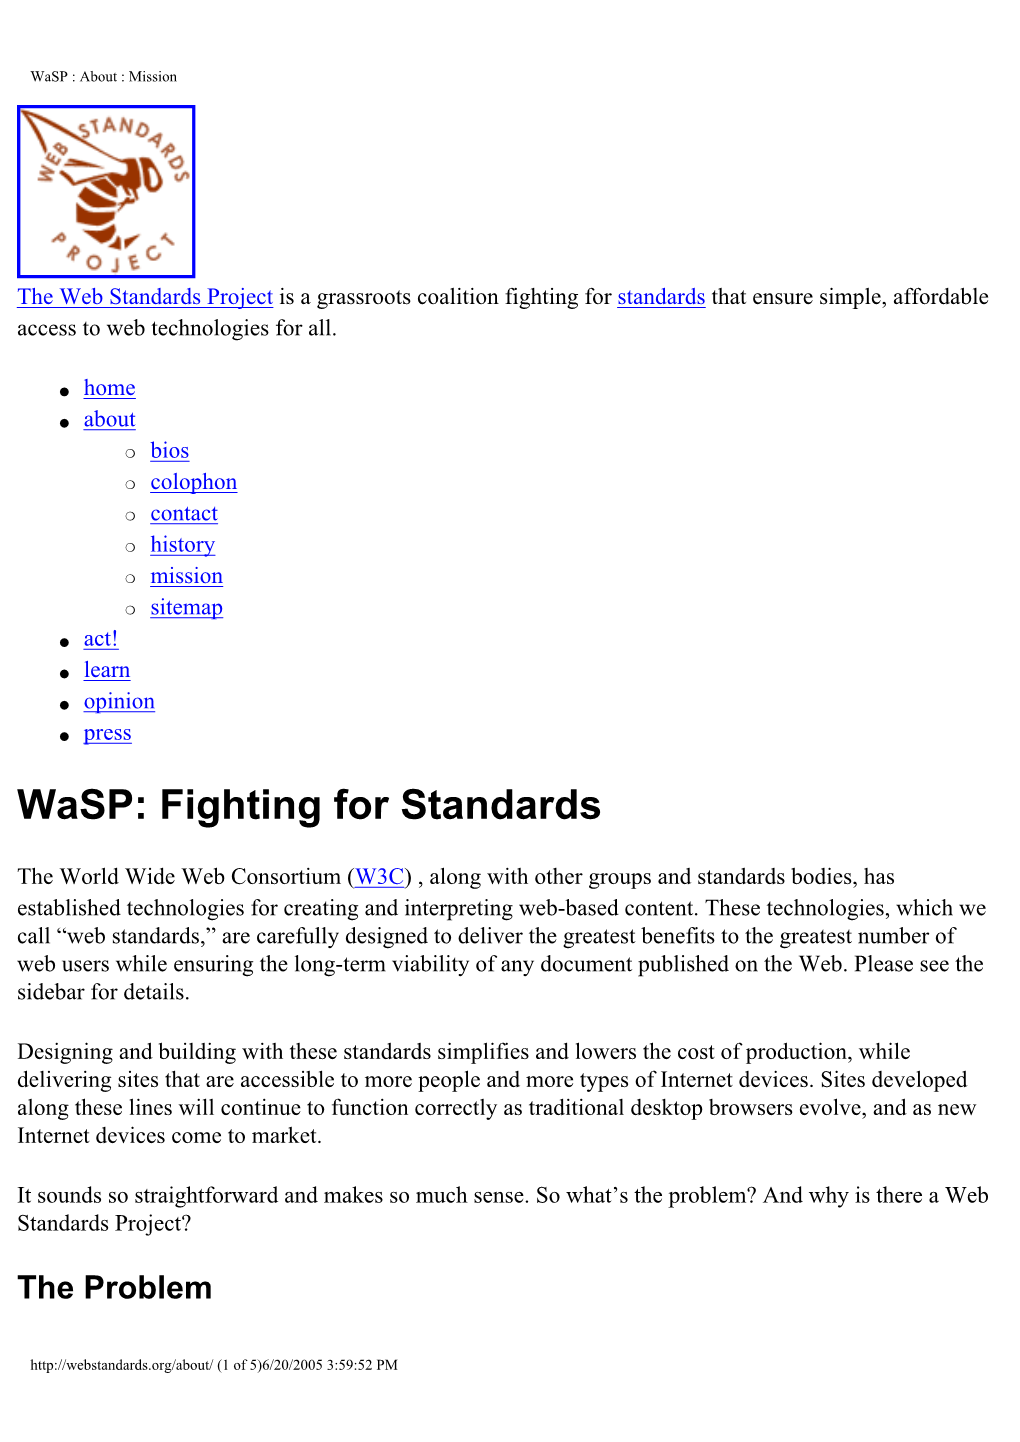 Wasp: Fighting for Standards